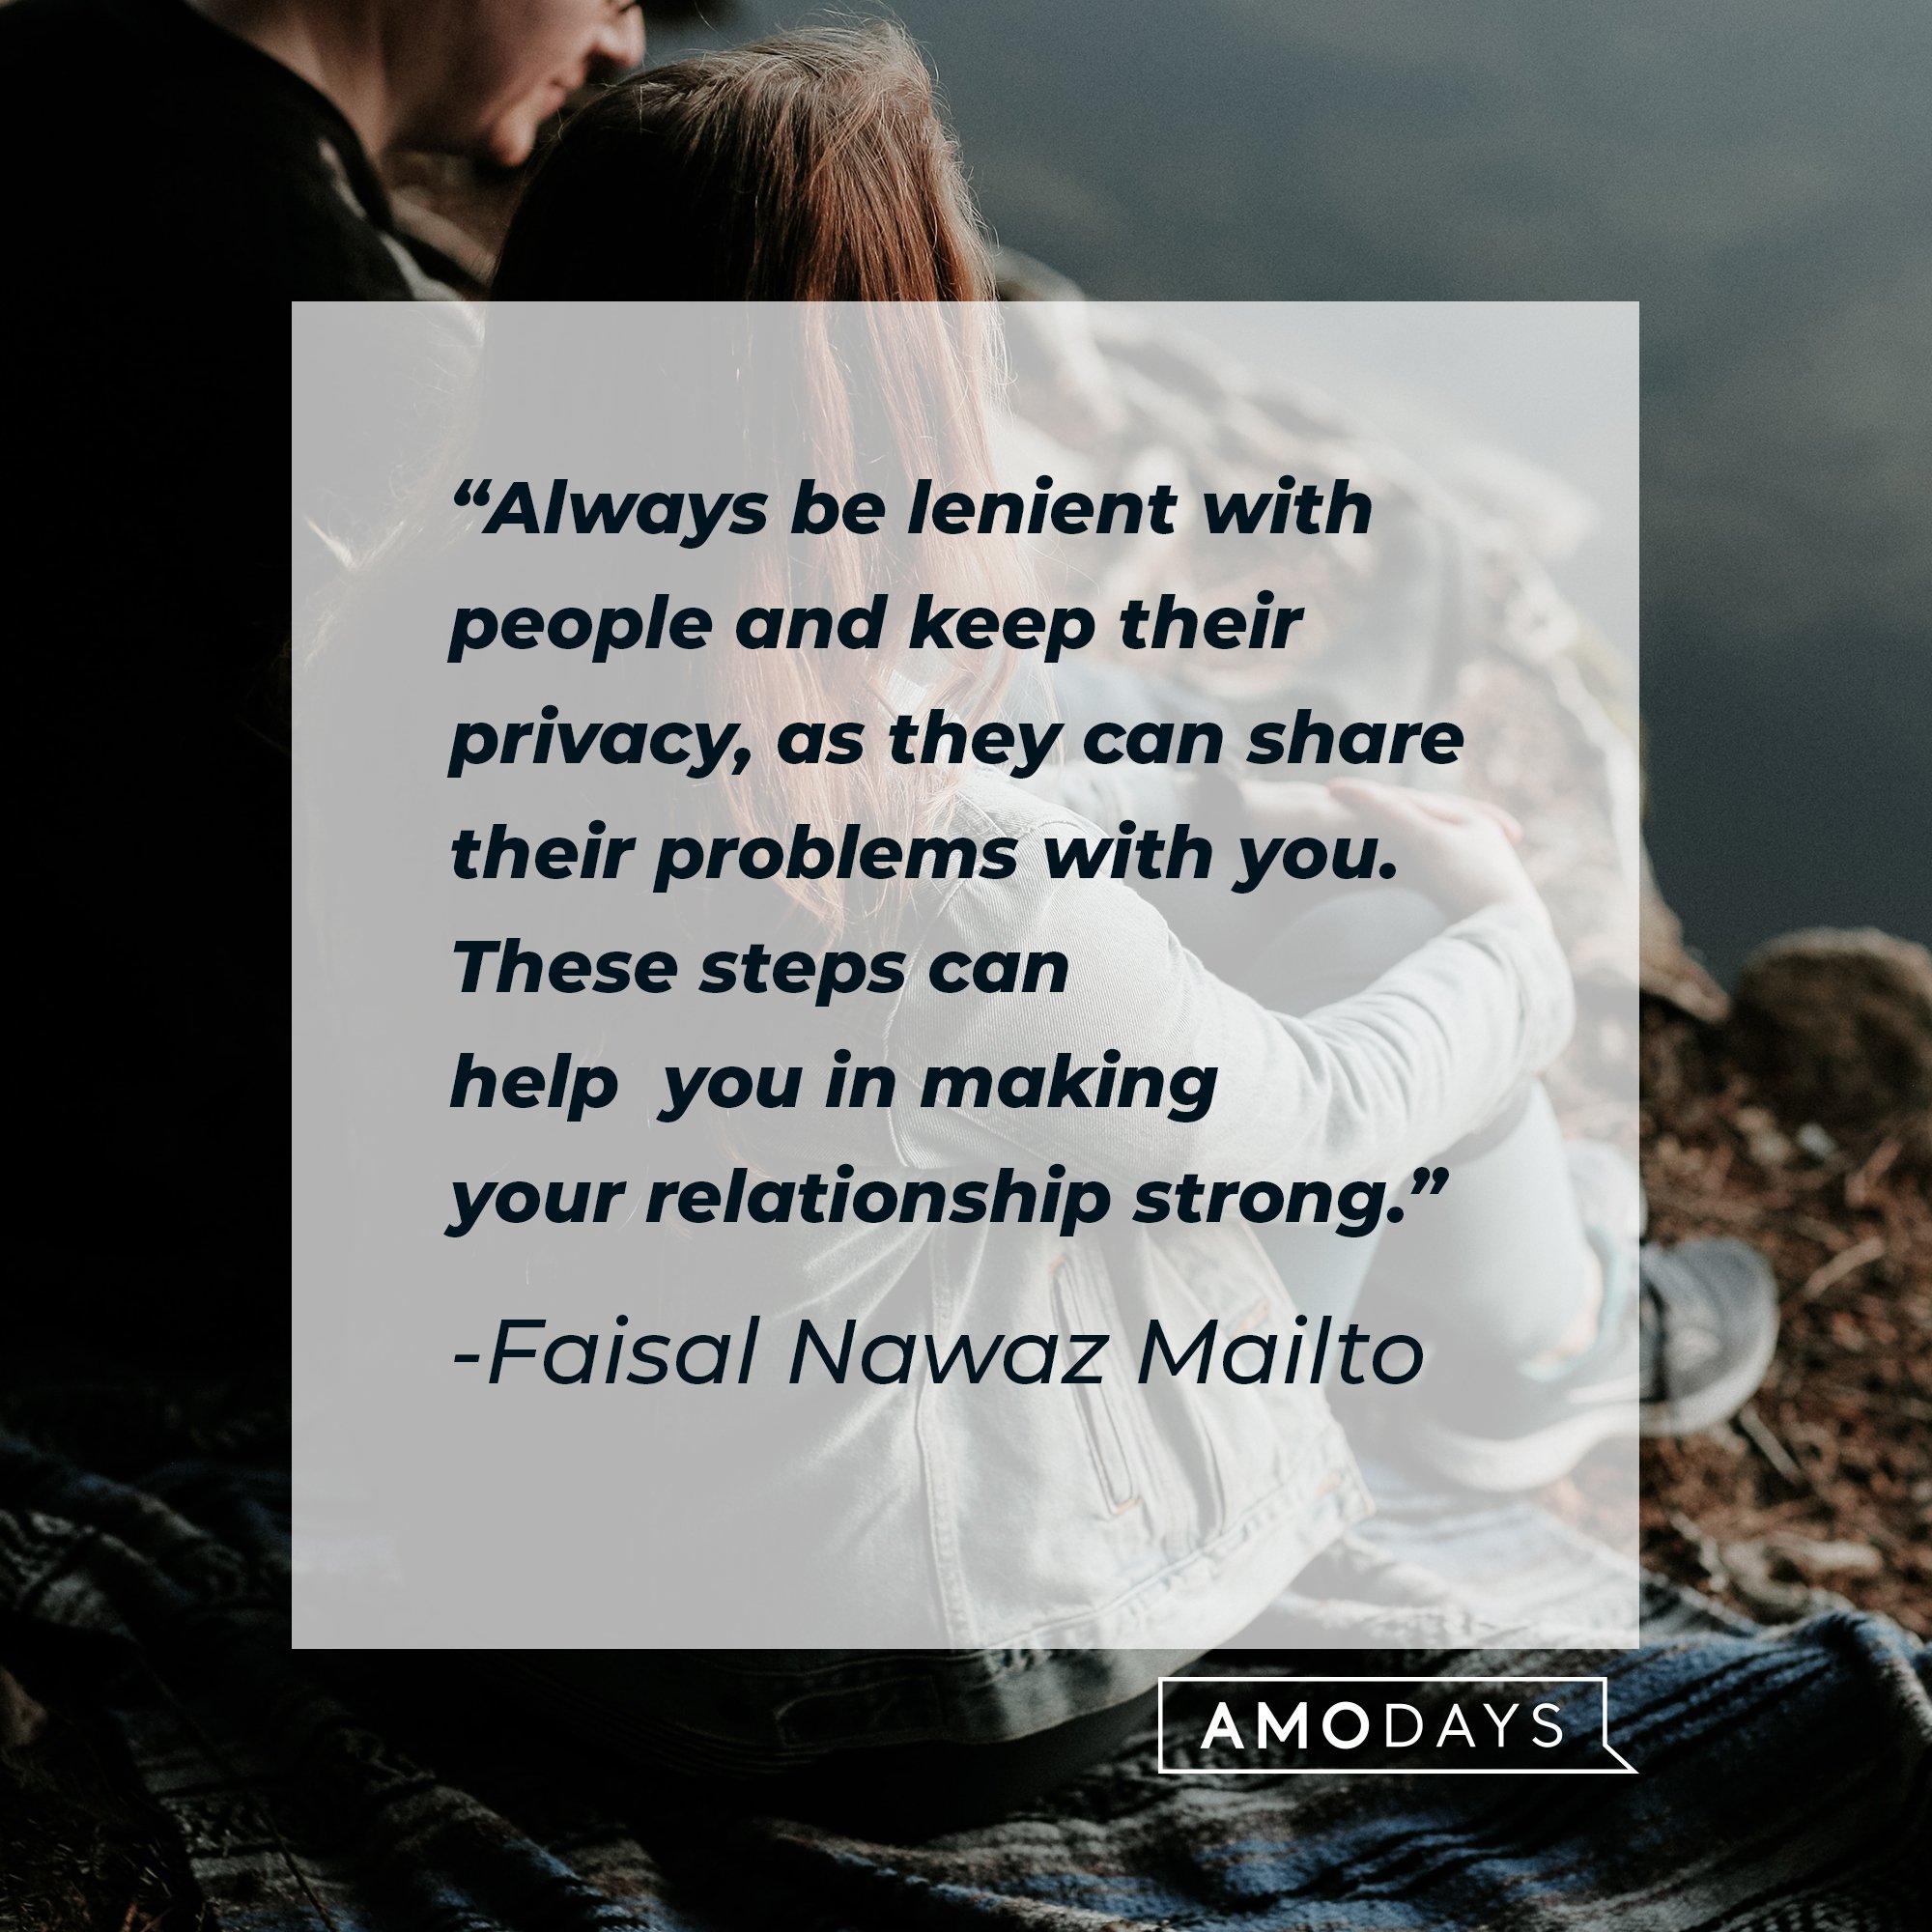 Faisal Nawaz Mailto’s quote: "Always be lenient with people and keep their privacy, as they can share their problems with you. These steps can help you in making your relationship strong." | Image: AmoDays  